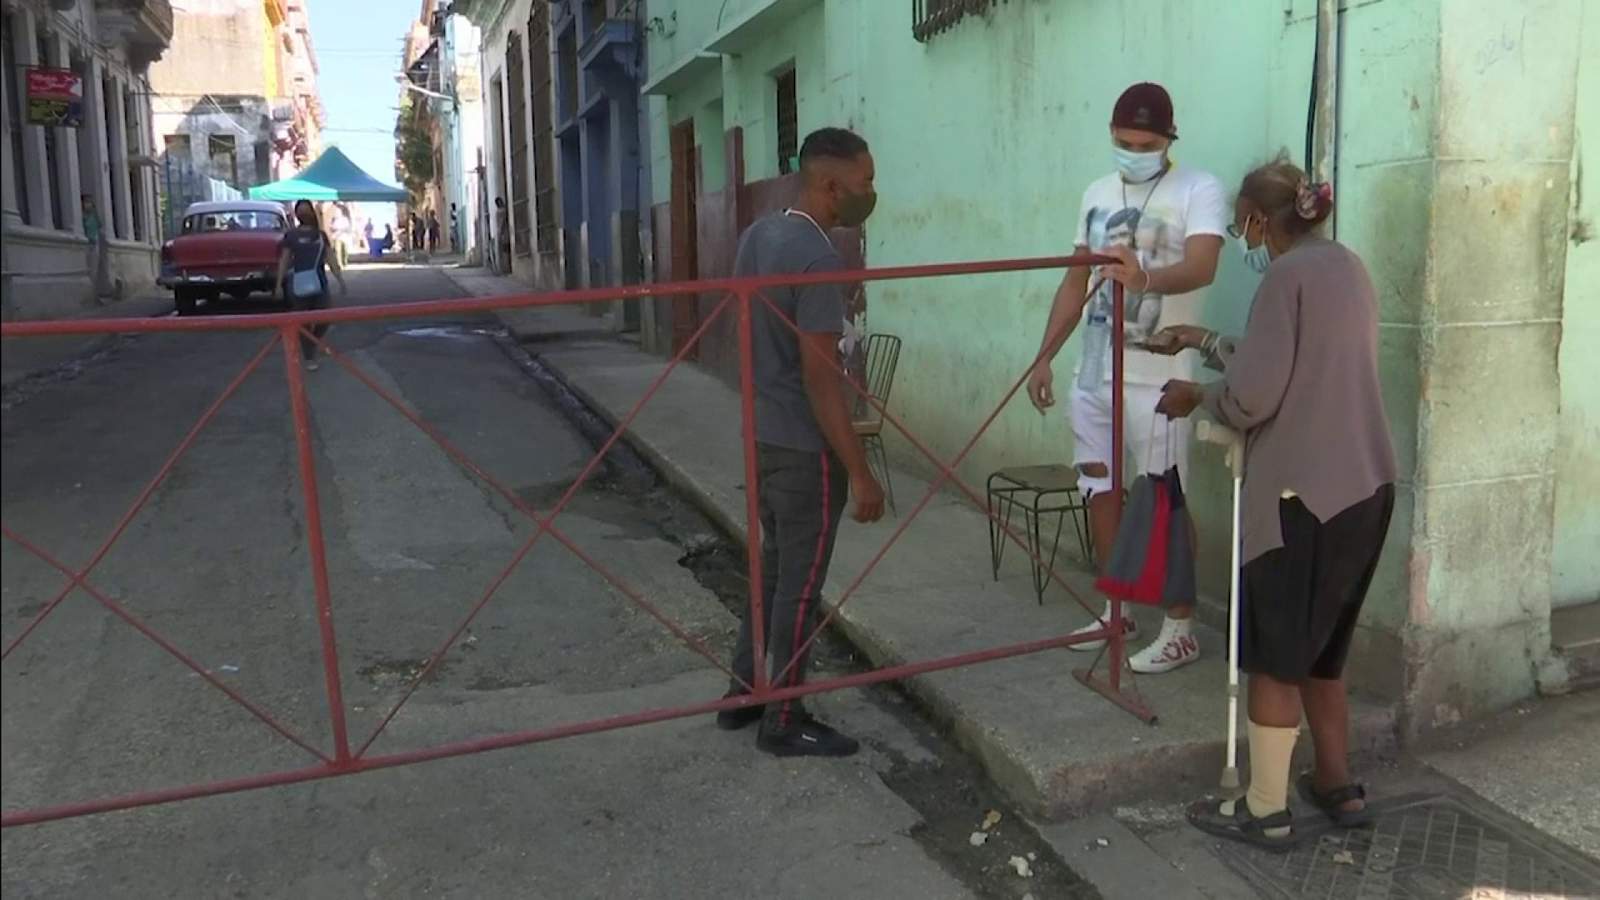 Cuba restricts access to areas of Havana; starts to produce COVID-19 vaccine